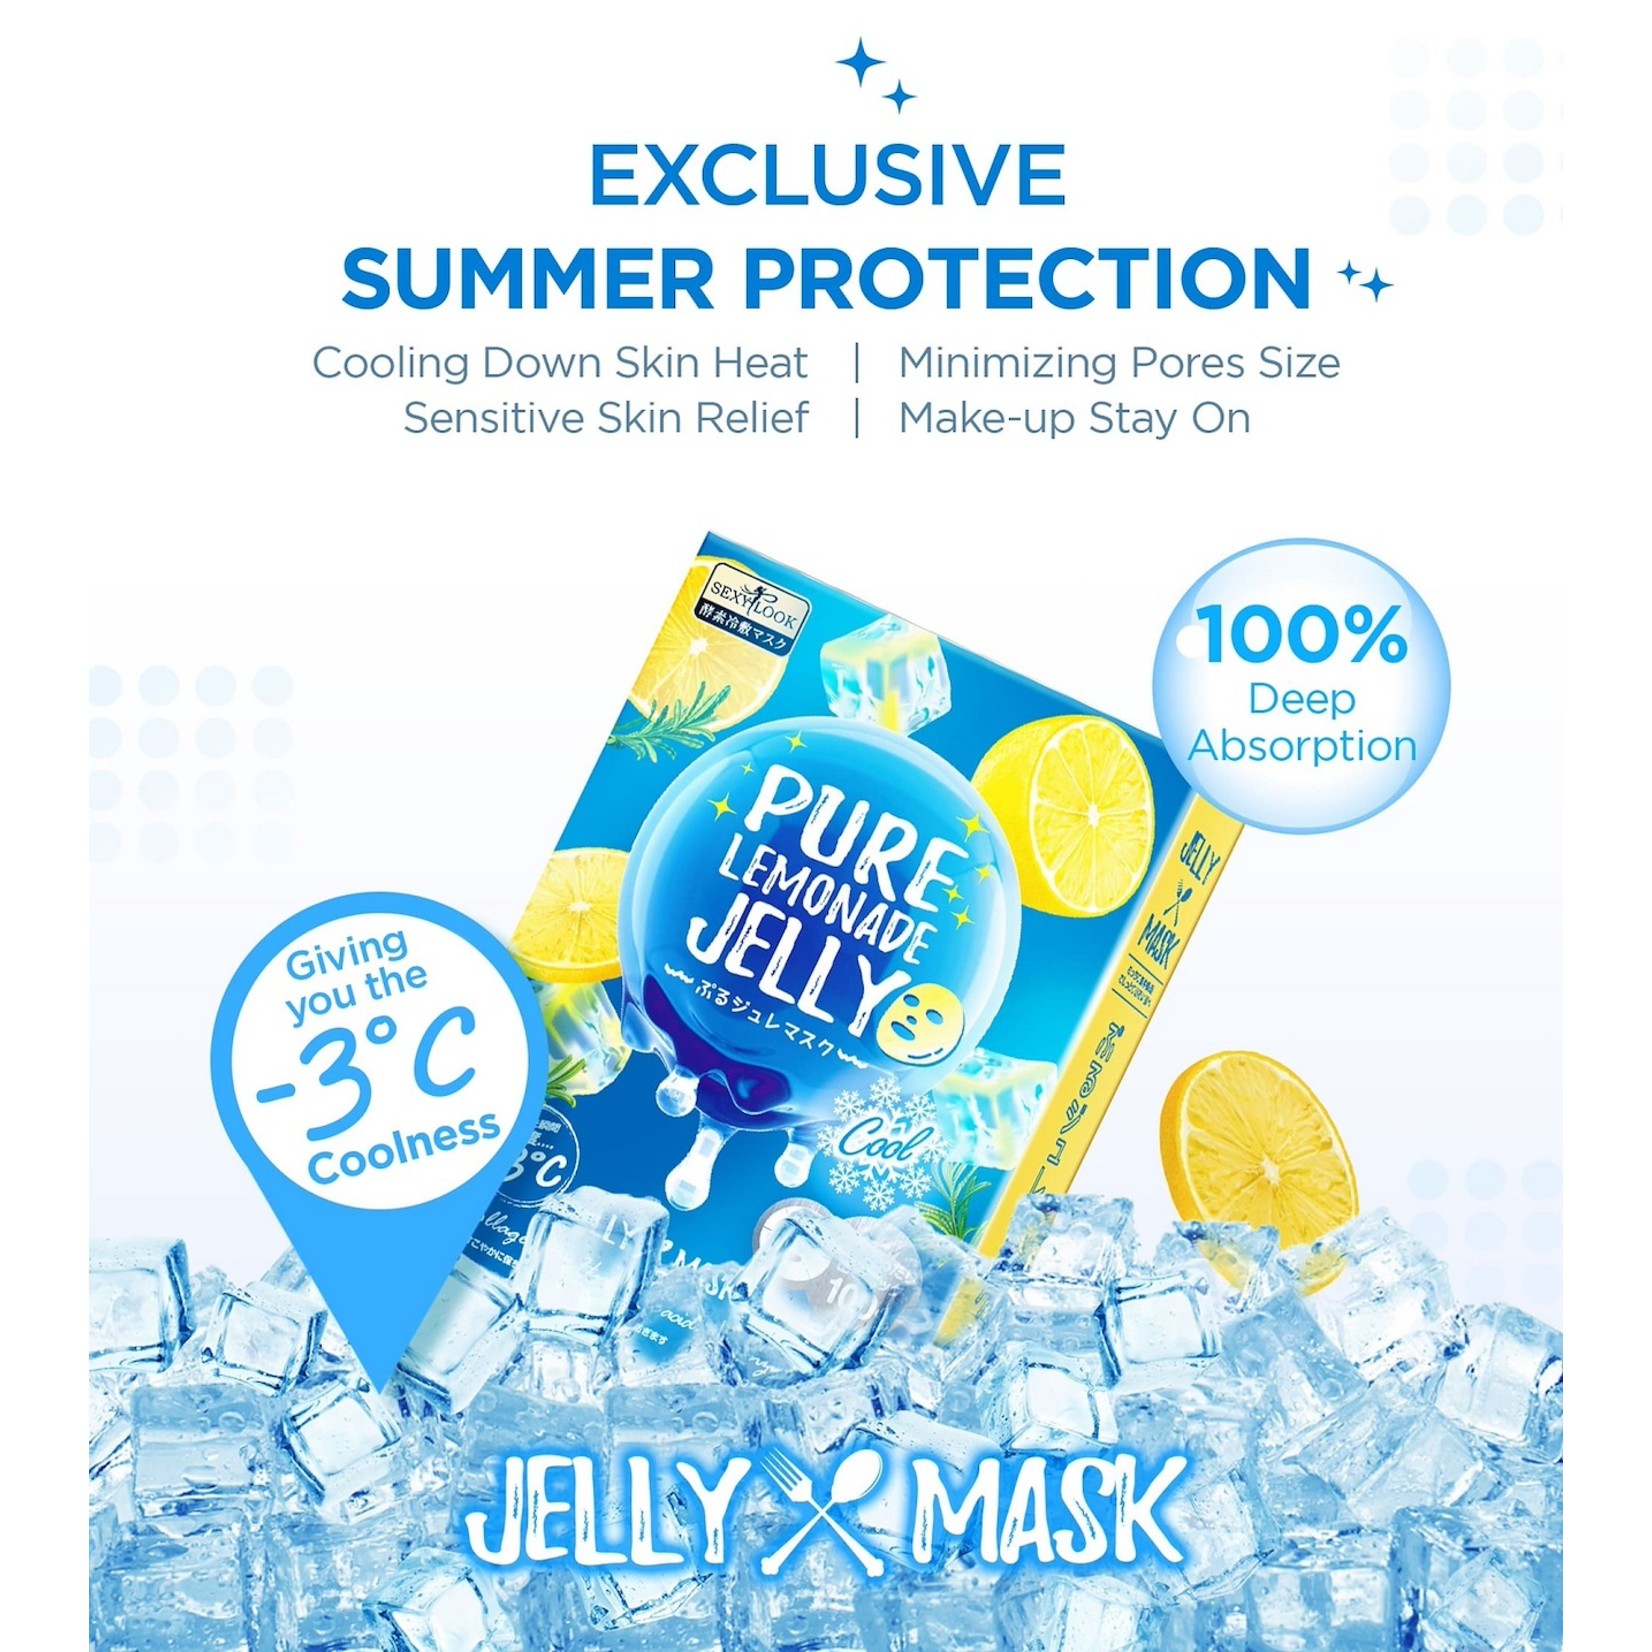 SEXYLOOK Pure Cool Jelly Mask Trial Mix (3 pcs)